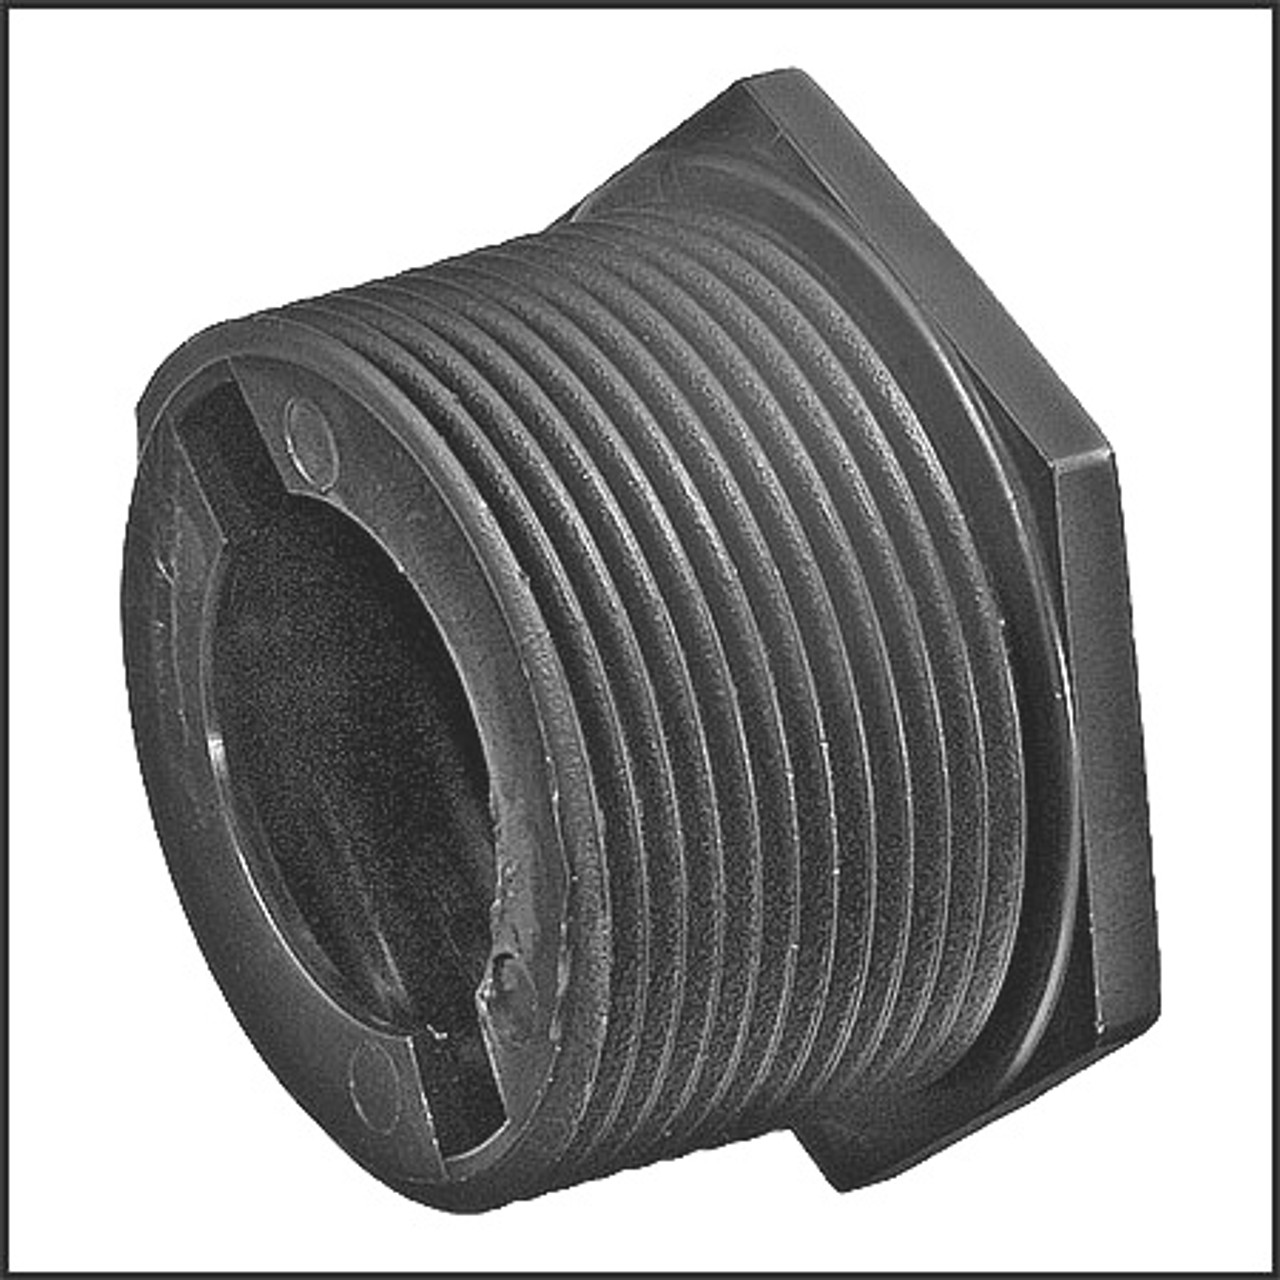 Polaris Black Universal Wall Fitting Collar For 360 Series Pool Cleaners (#6-550-00)